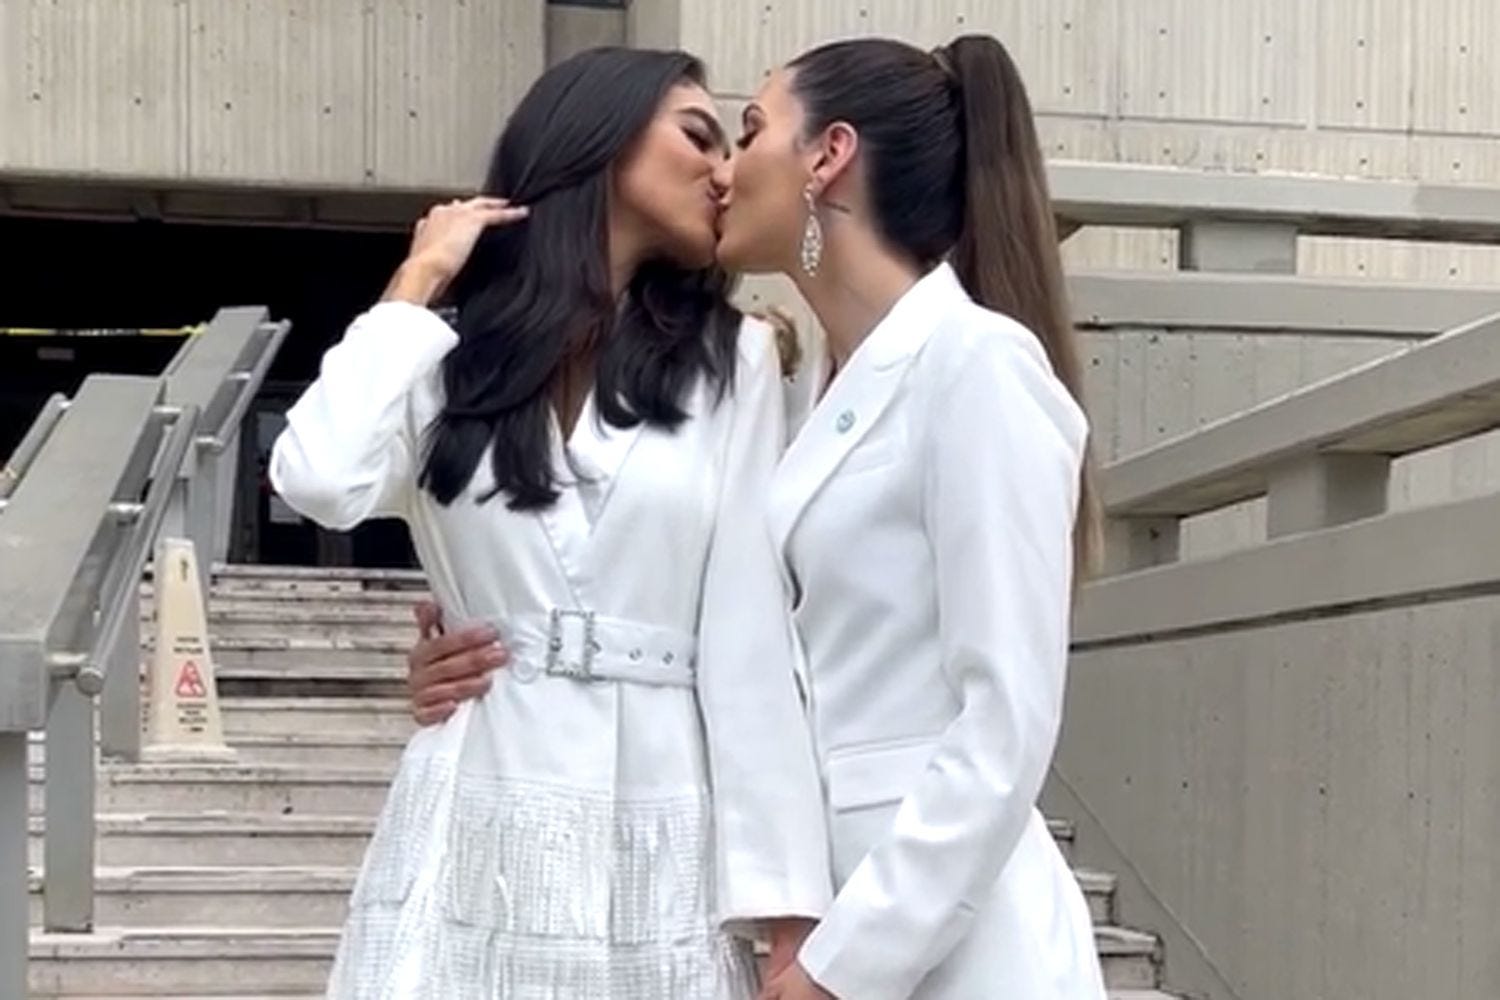 Beauty Queens Miss Argentina and Miss Puerto Rico Reveal They've Secretly  Married